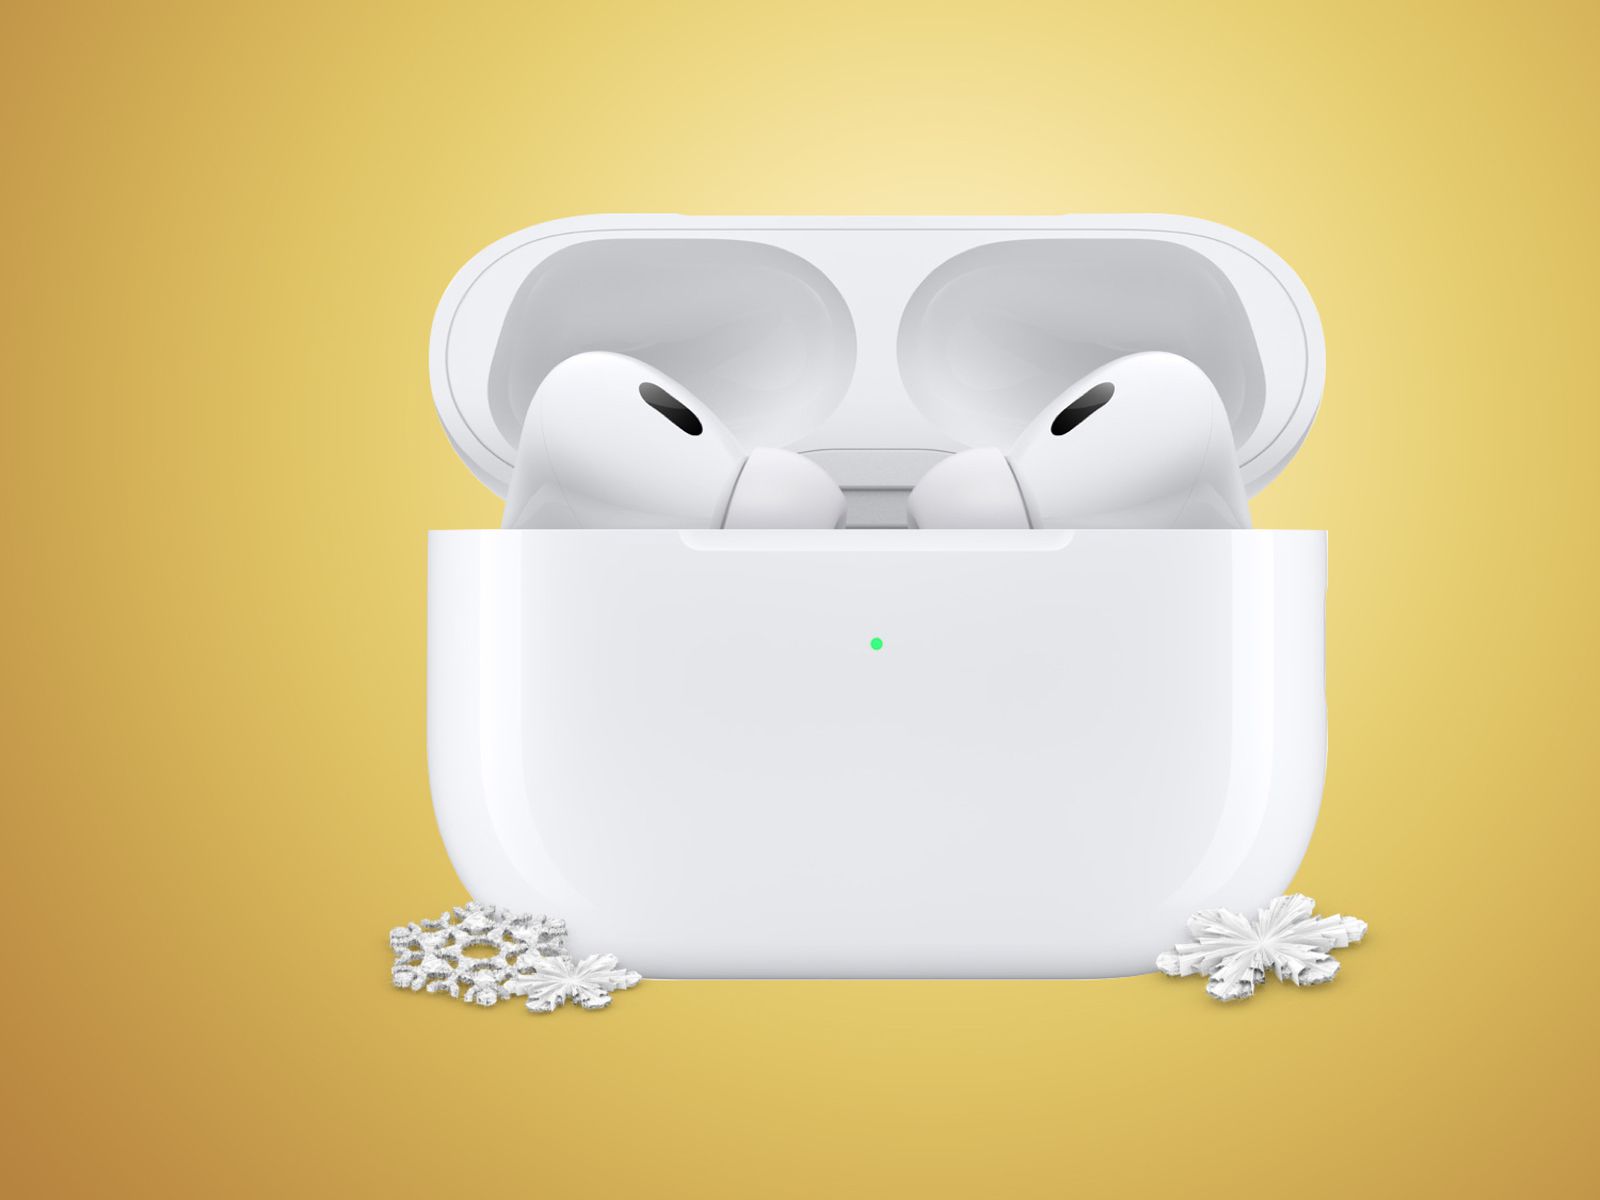 Apple's new AirPods Pro 2 return to all-time low at $200 ahead of the  holidays (Save $49)